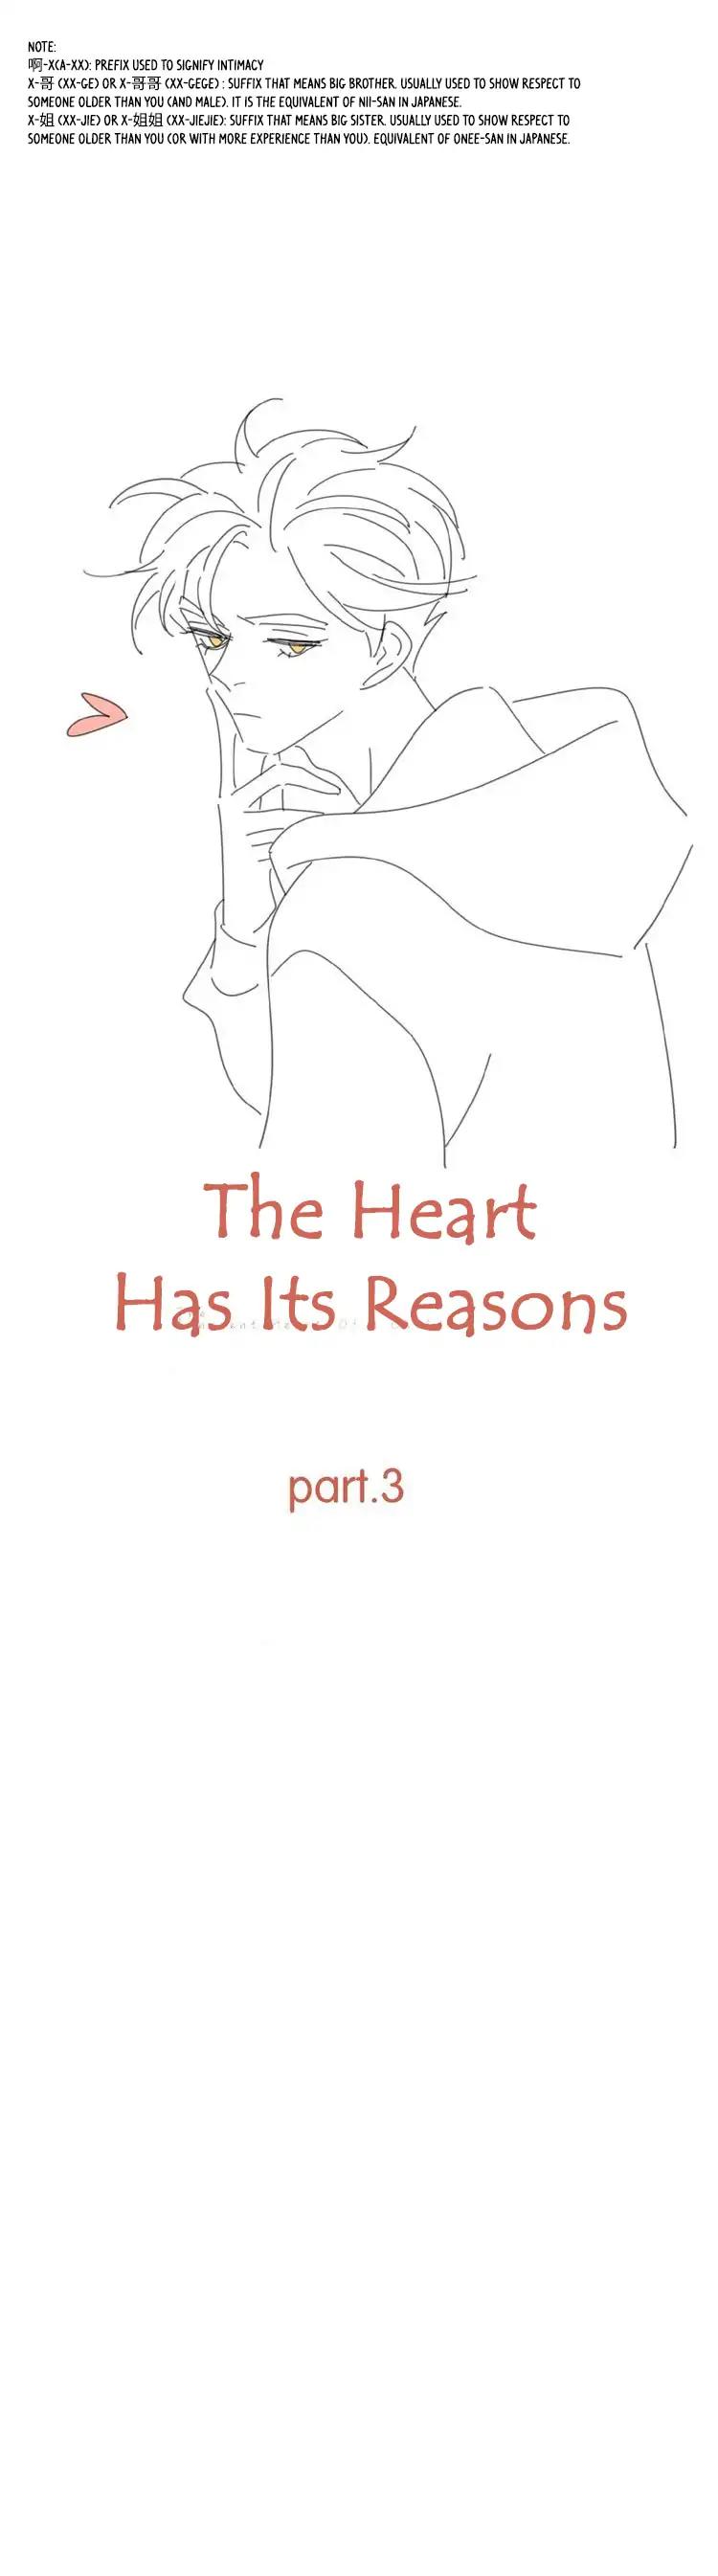 The Looks of Love: The Heart Has Its Reasons Chapter 3: